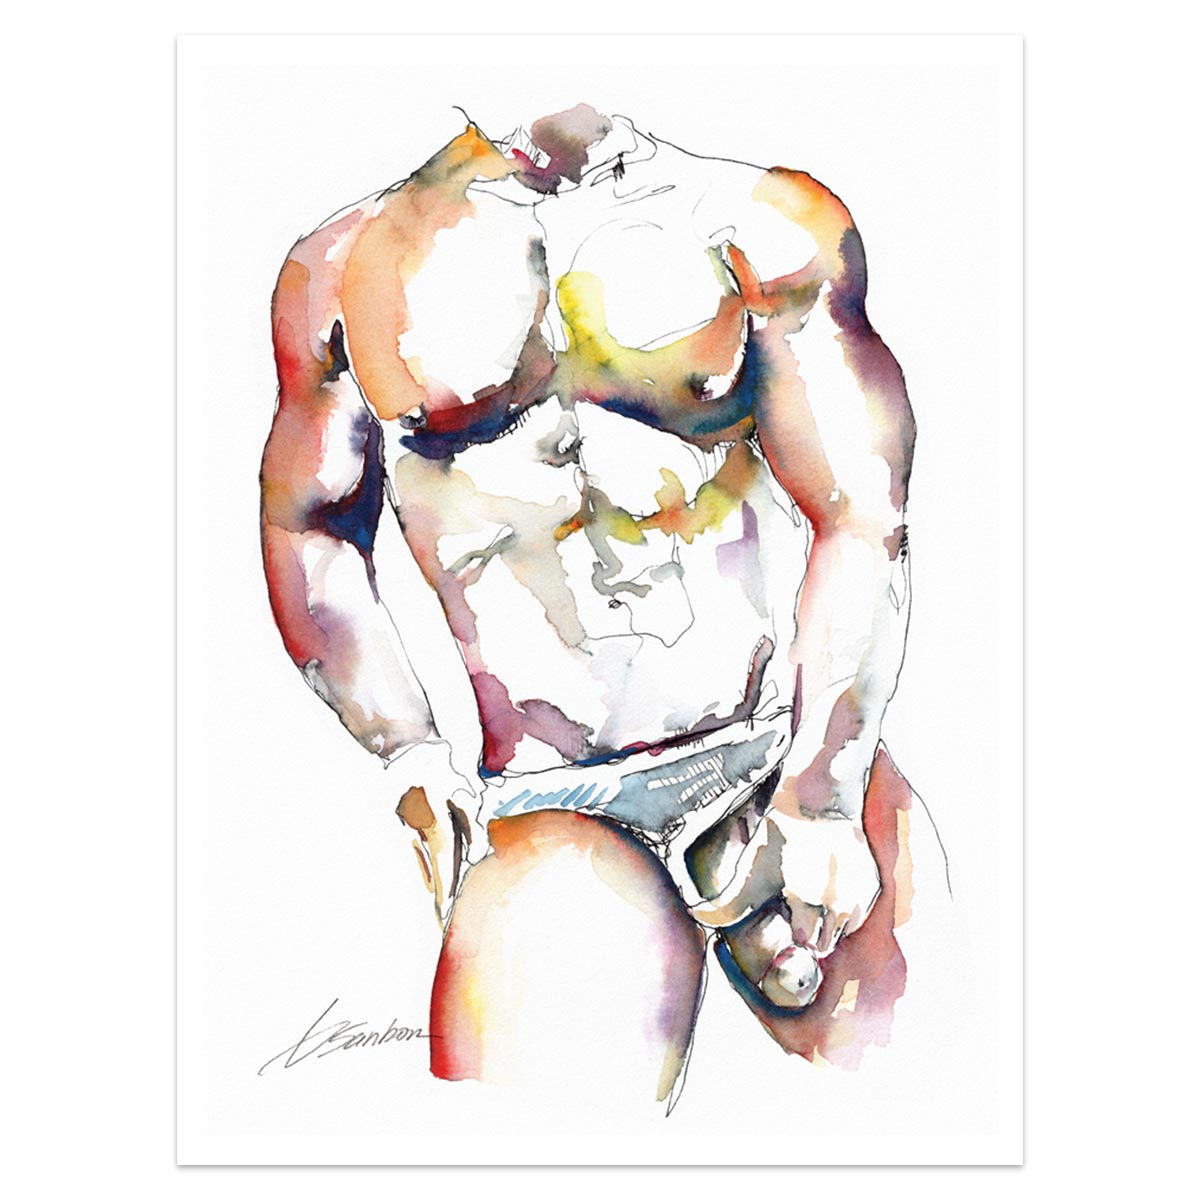 Massive Musculature in Tight White Underwear, Strong Arms - Giclee Art Print